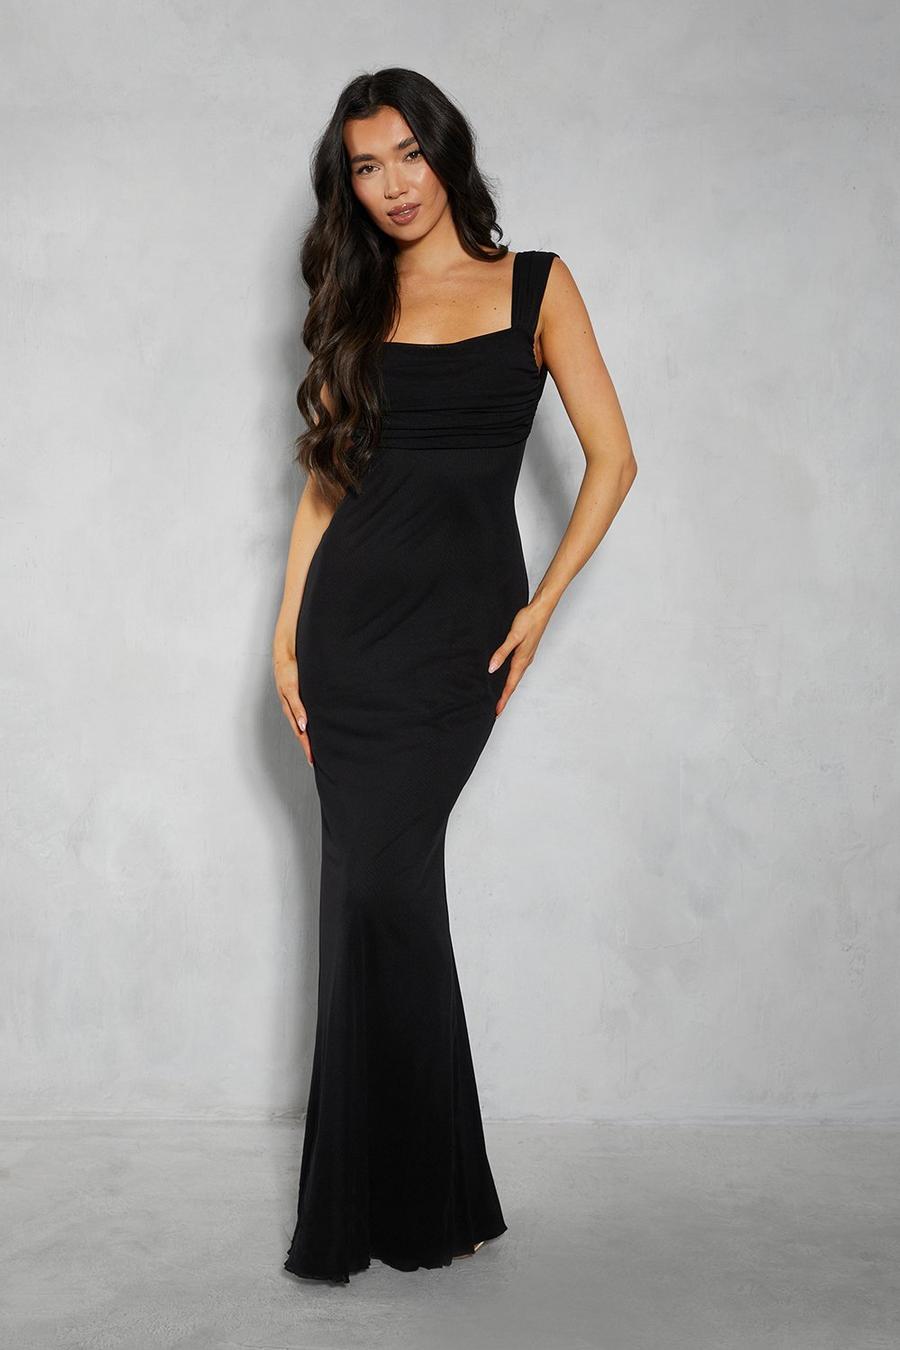 Black Mesh Ruched Bust Lace Up Back Fishtail Maxi Dress